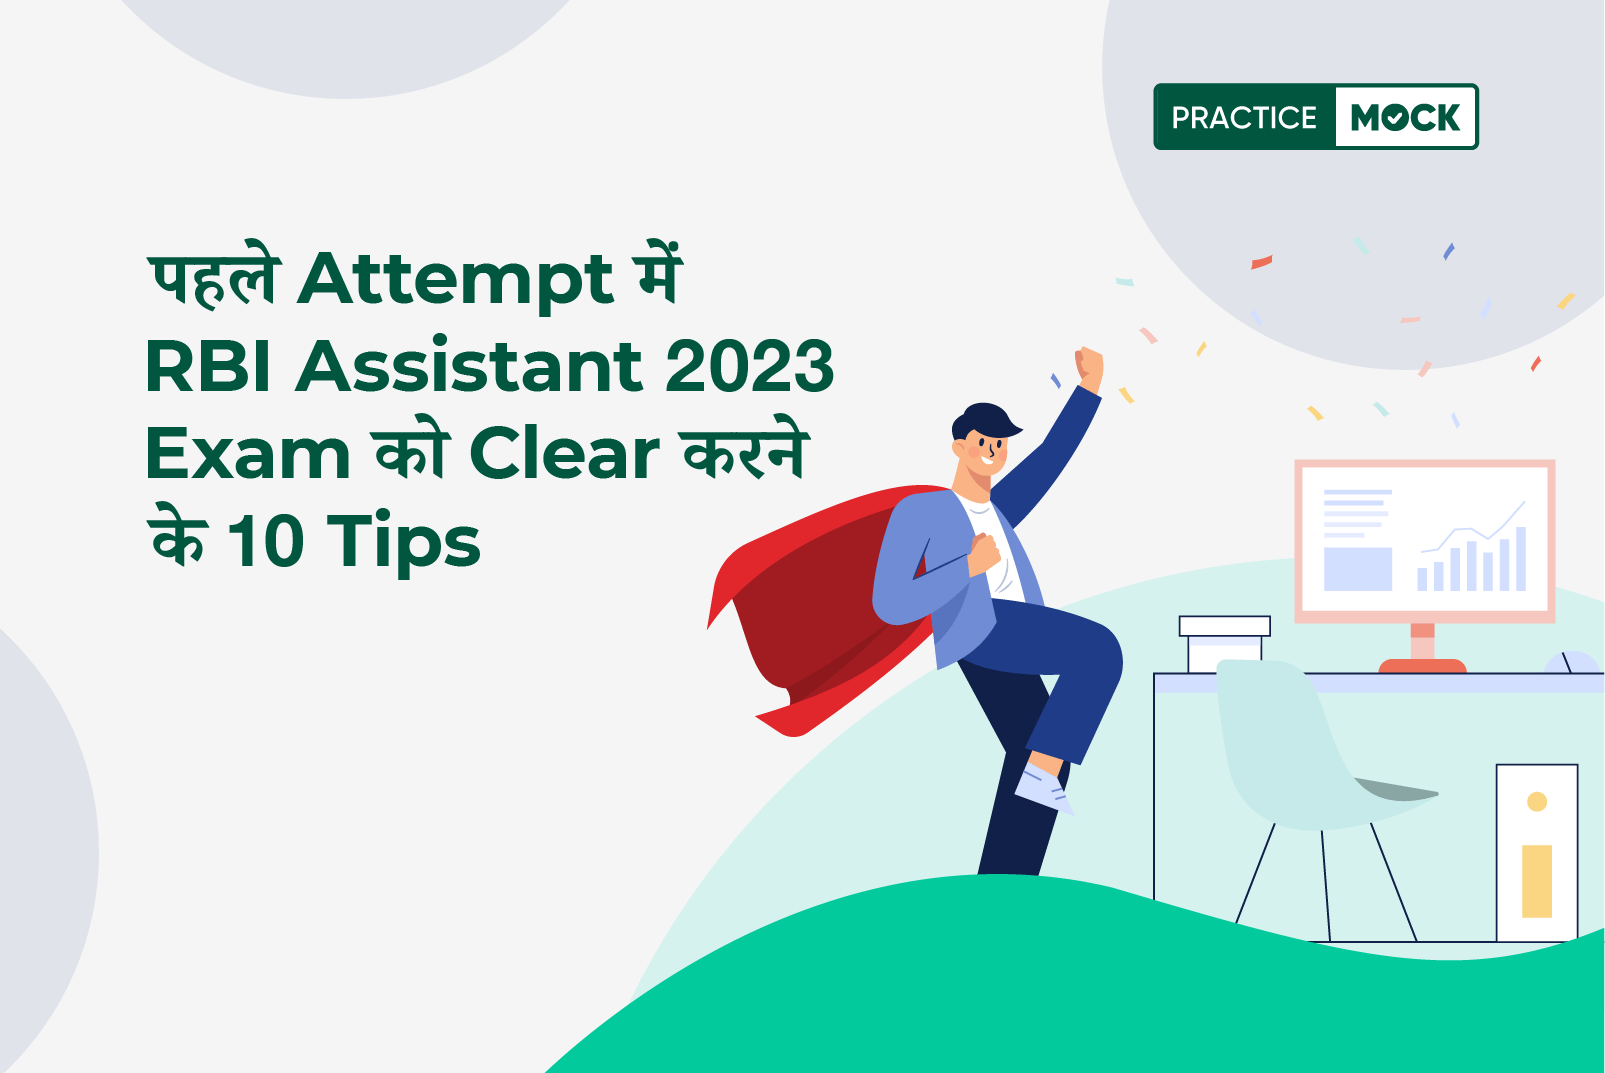 10 Tips to Clear RBI Assistant 2023 Exam in First Attempt